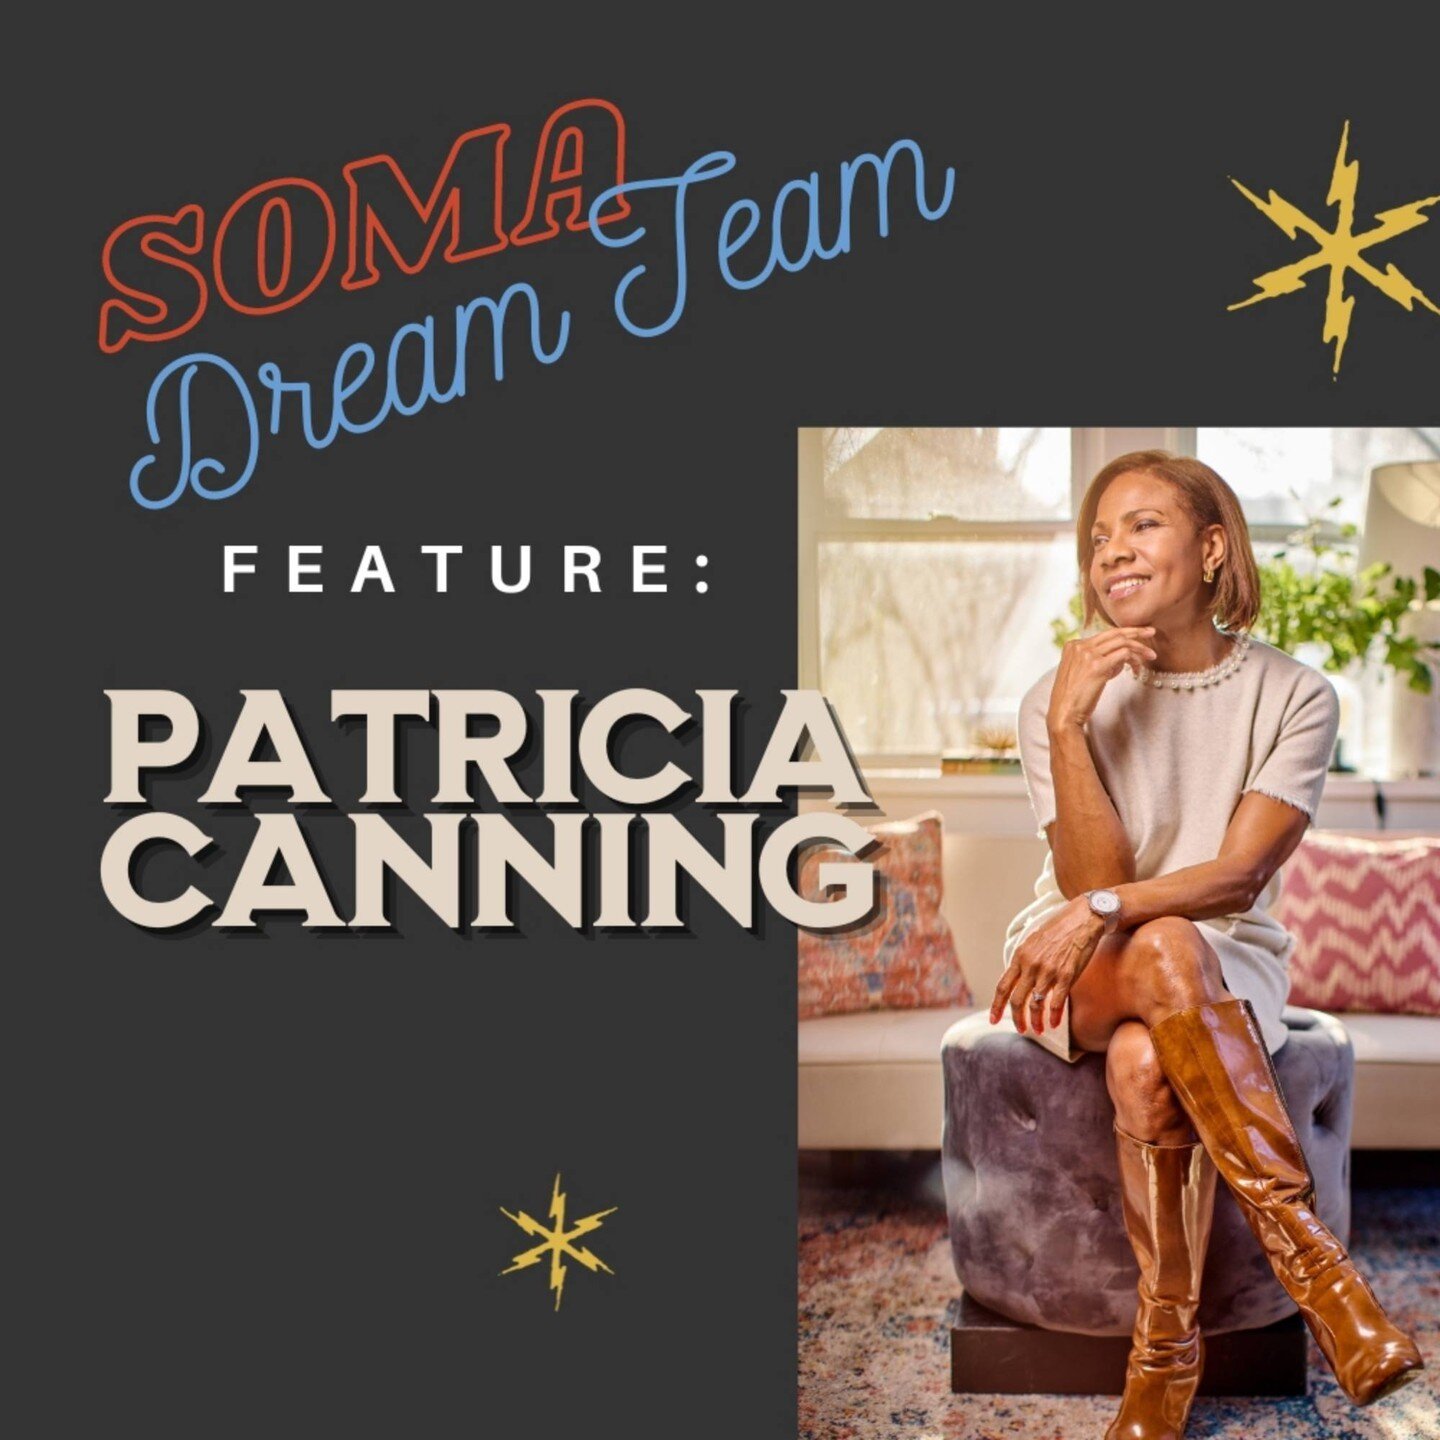 I have so much fun doing these SOMA Living Magazine Dream Team makeover features! I get to photograph amazing local women and bring out the superstar in them.
 
Last month, we worked with Patricia Canning. Patricia is a businesswoman, community activ